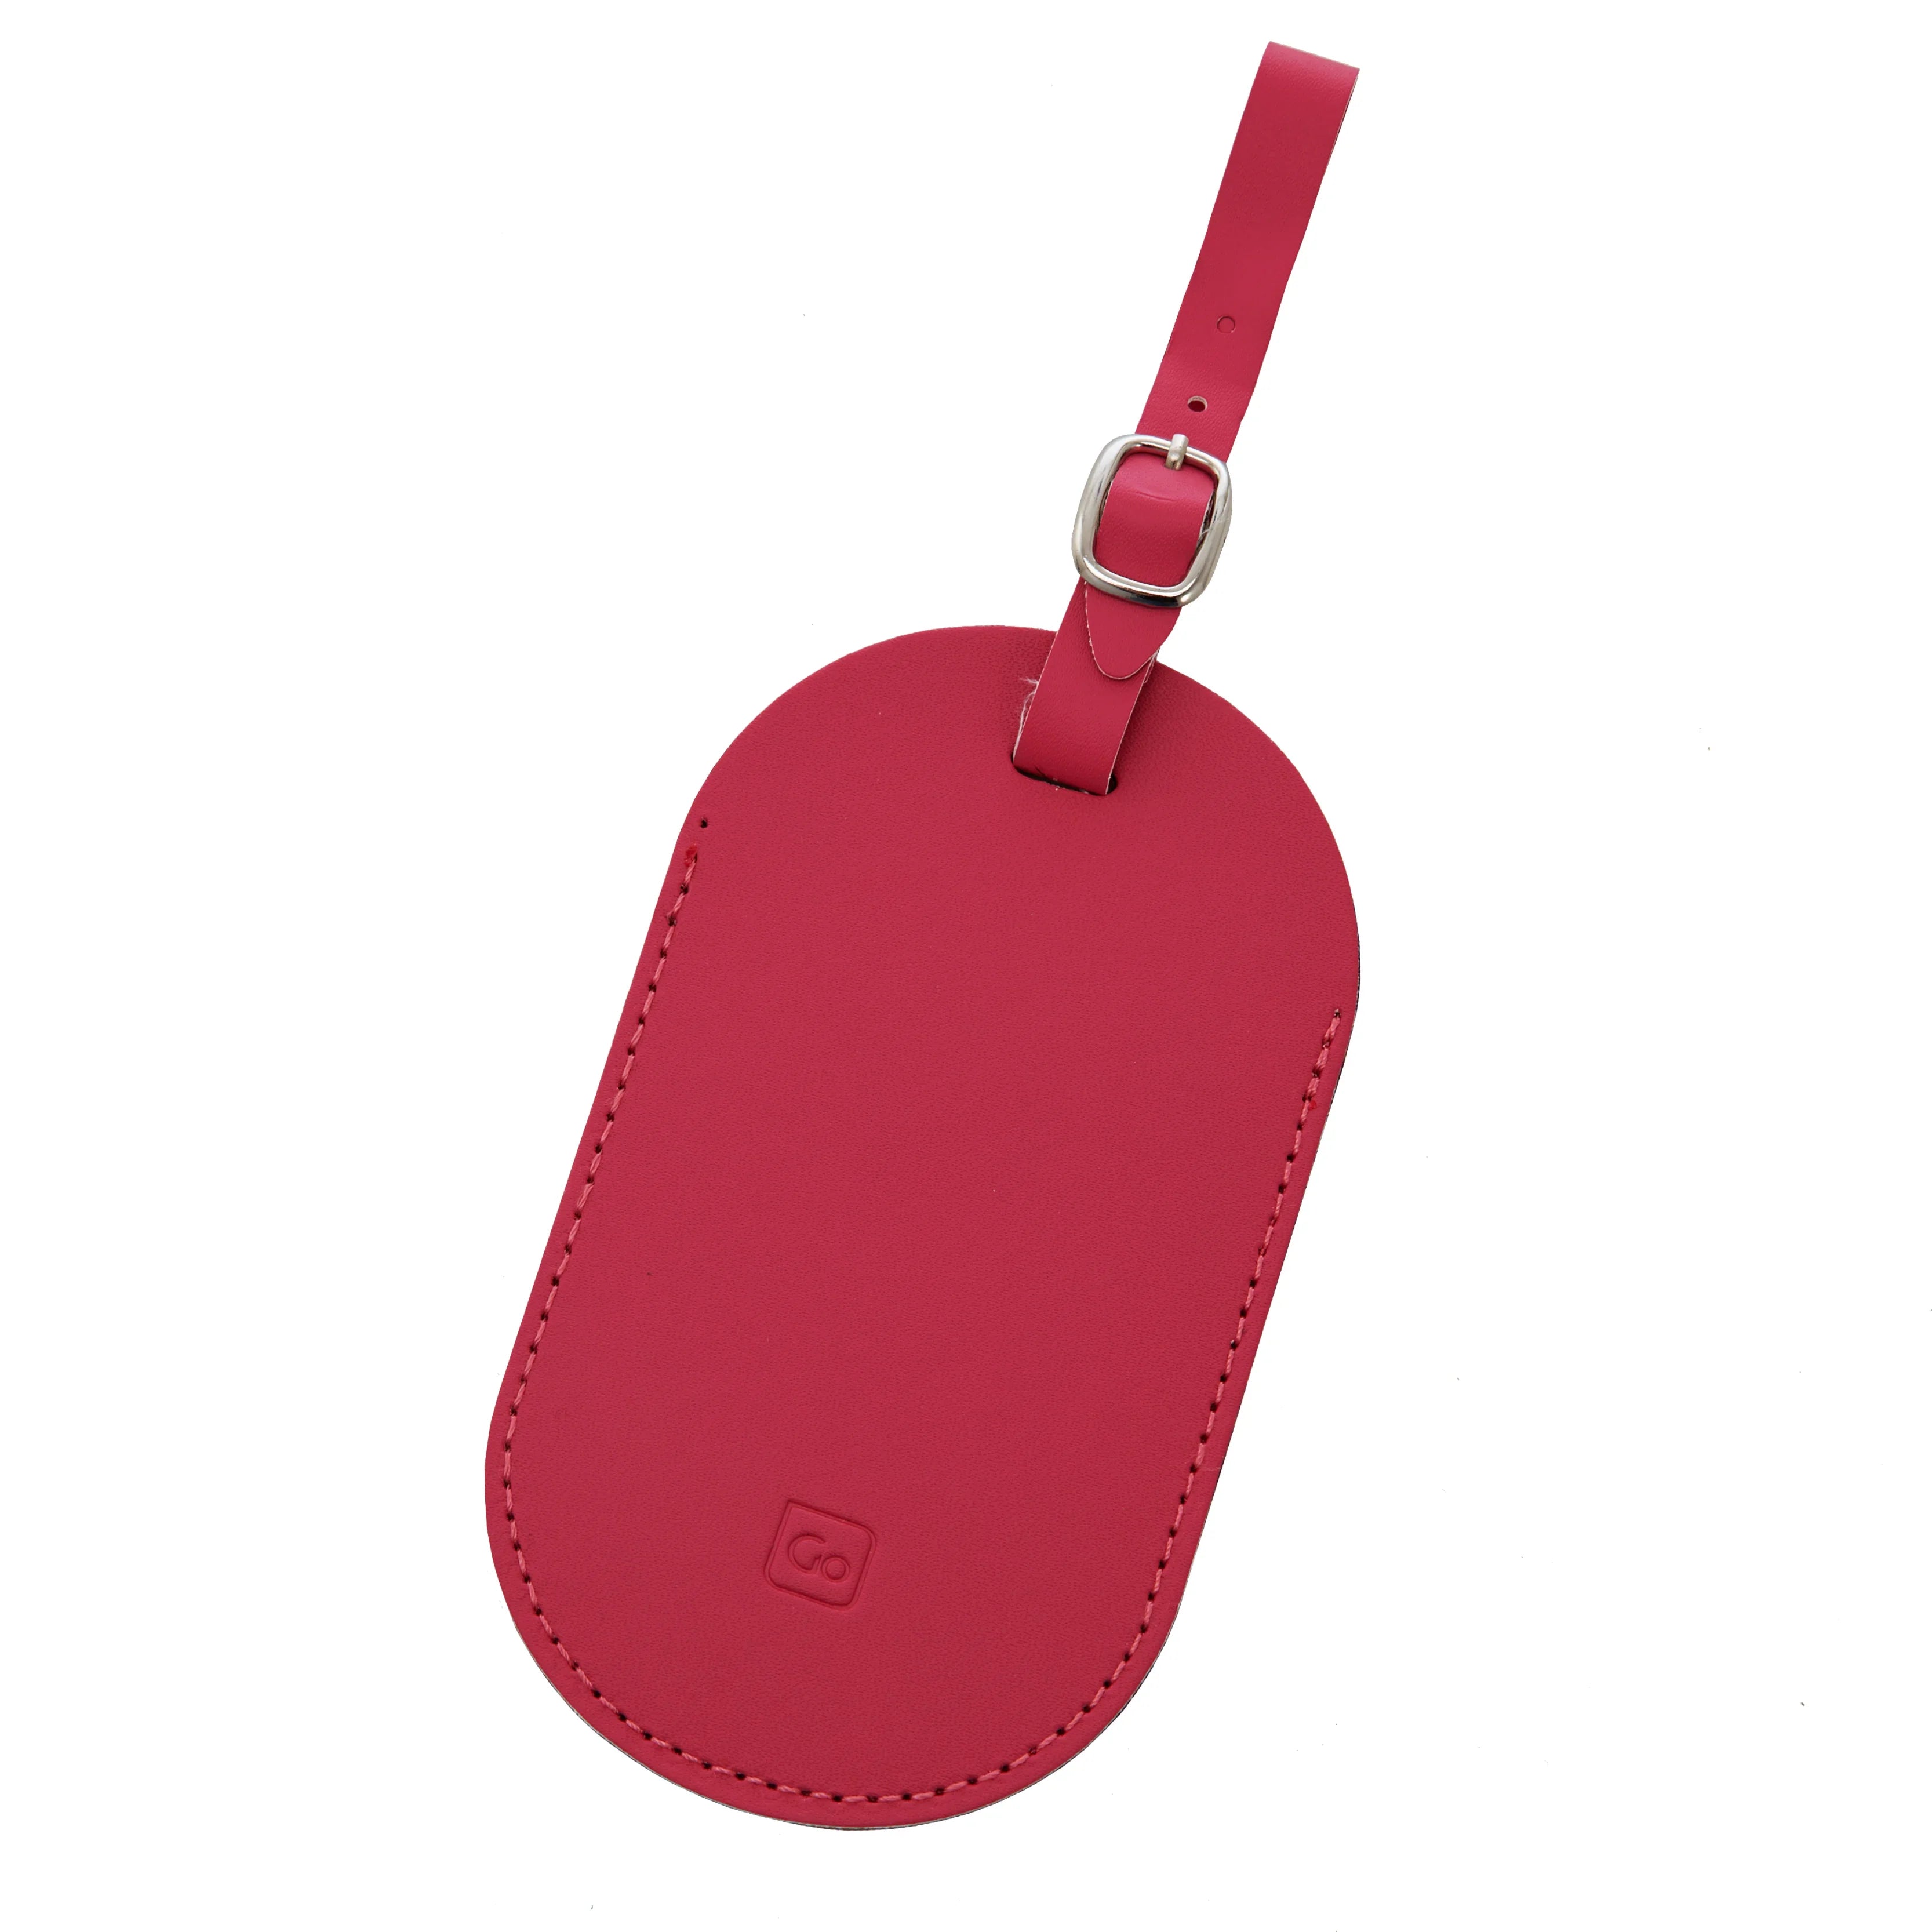 Design Go travel accessories luggage tag - pink